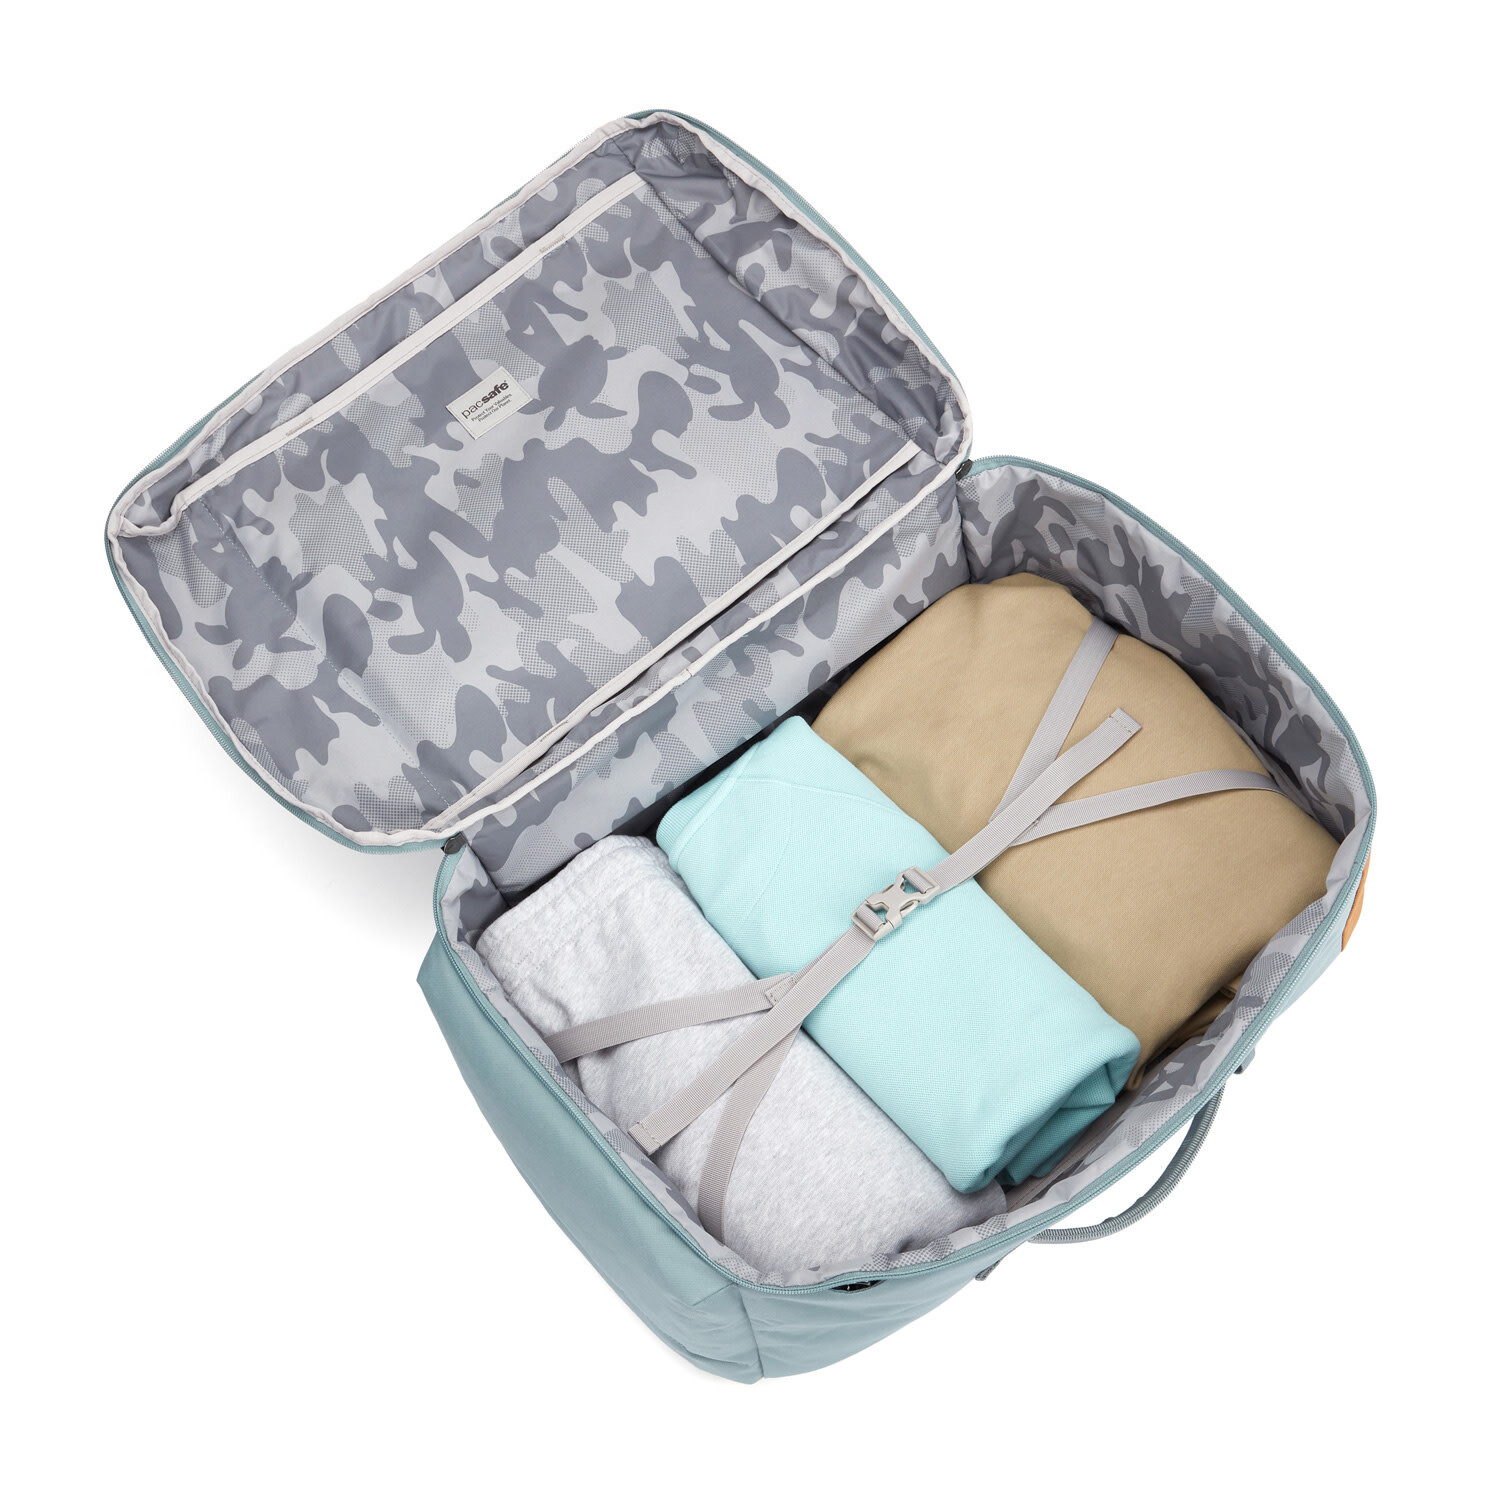 Women's Travel Collection - Pacsafe